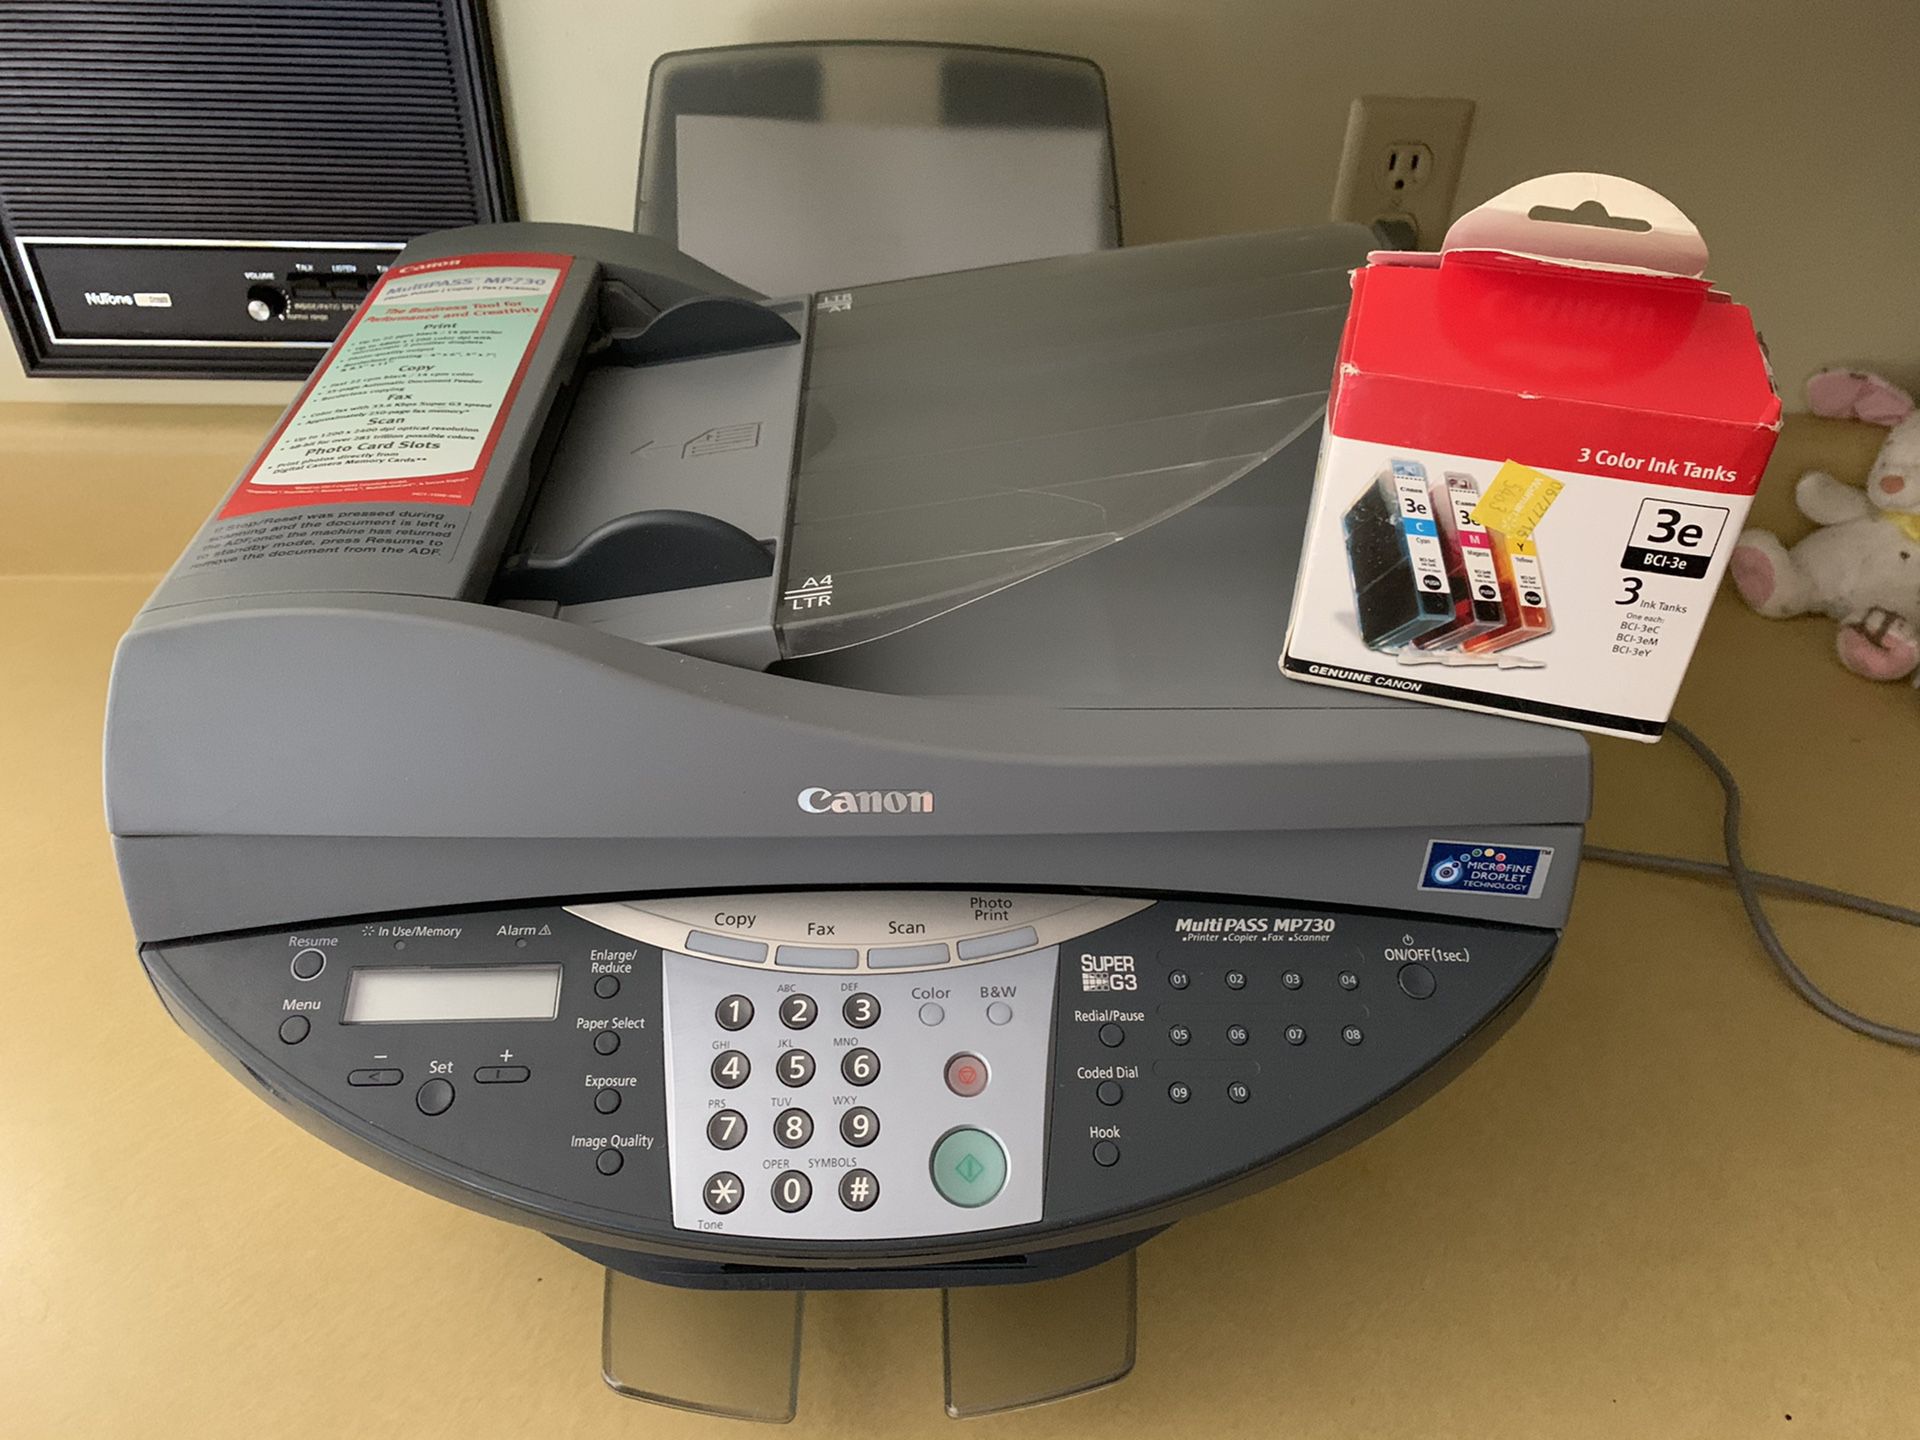 Canon Multipass MP730 photo printer, copier, color fax, and scanner